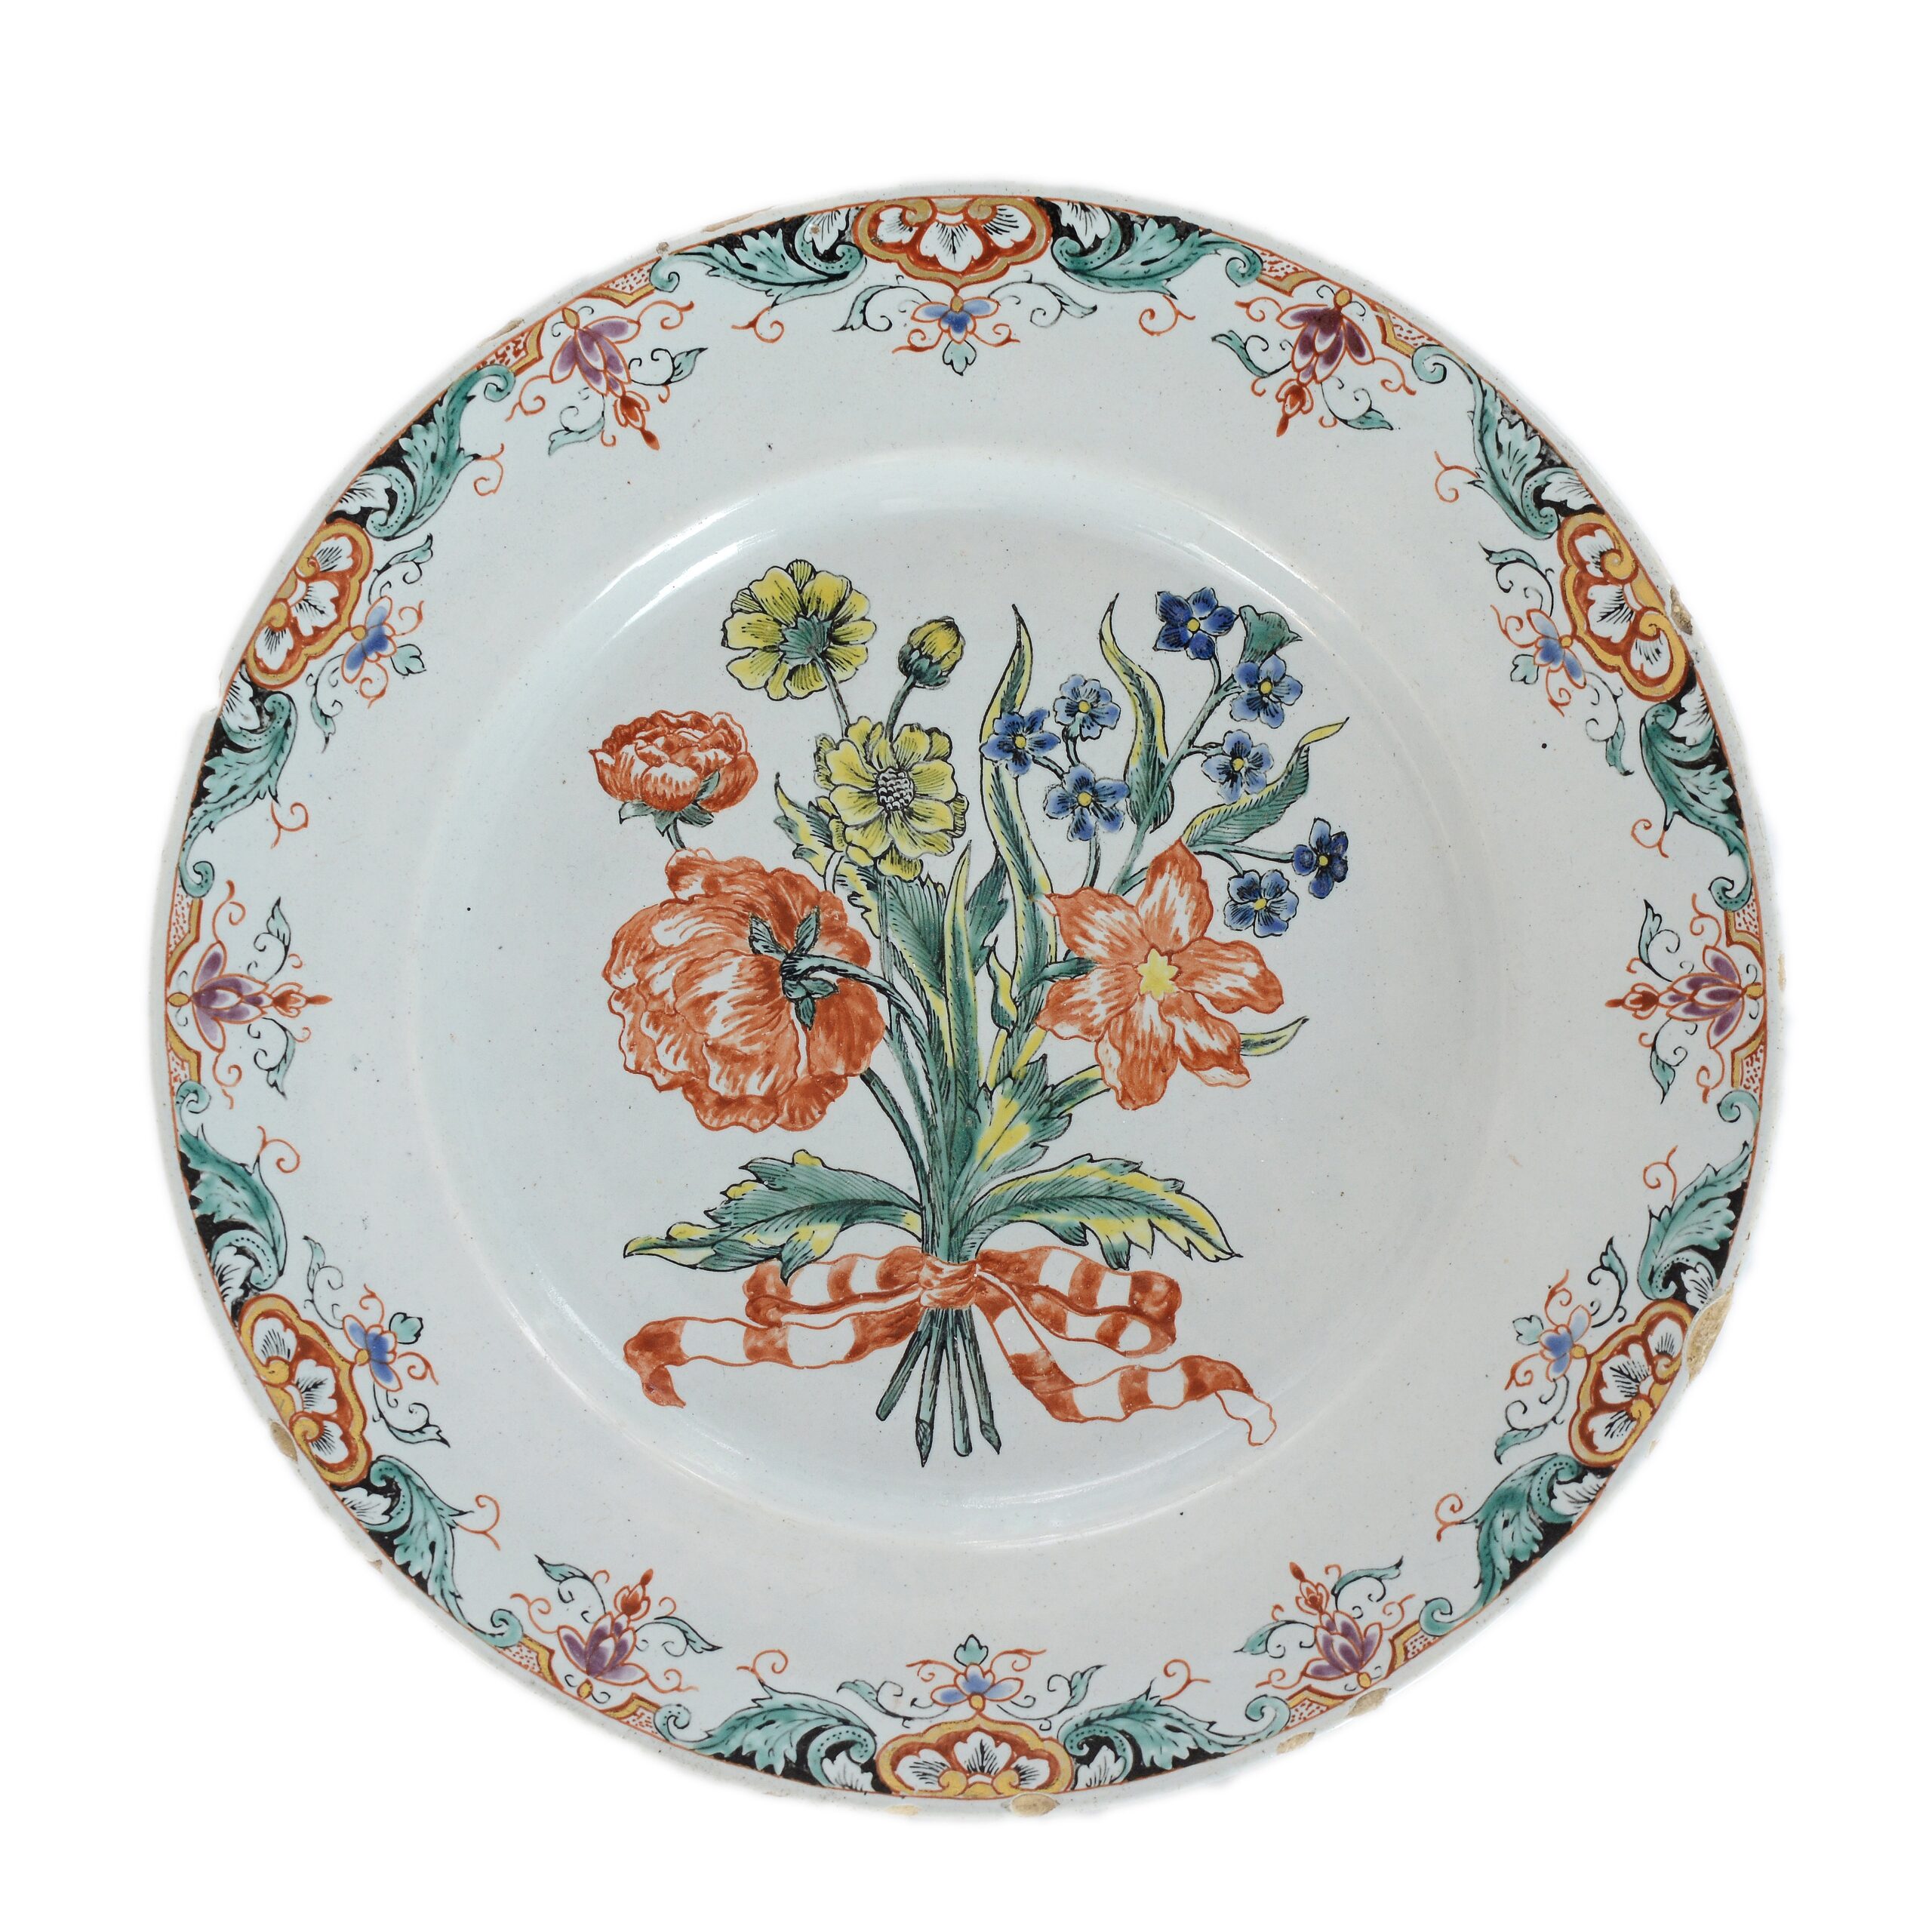 D2068 Polychrome and Gilded Delftware Flower plate